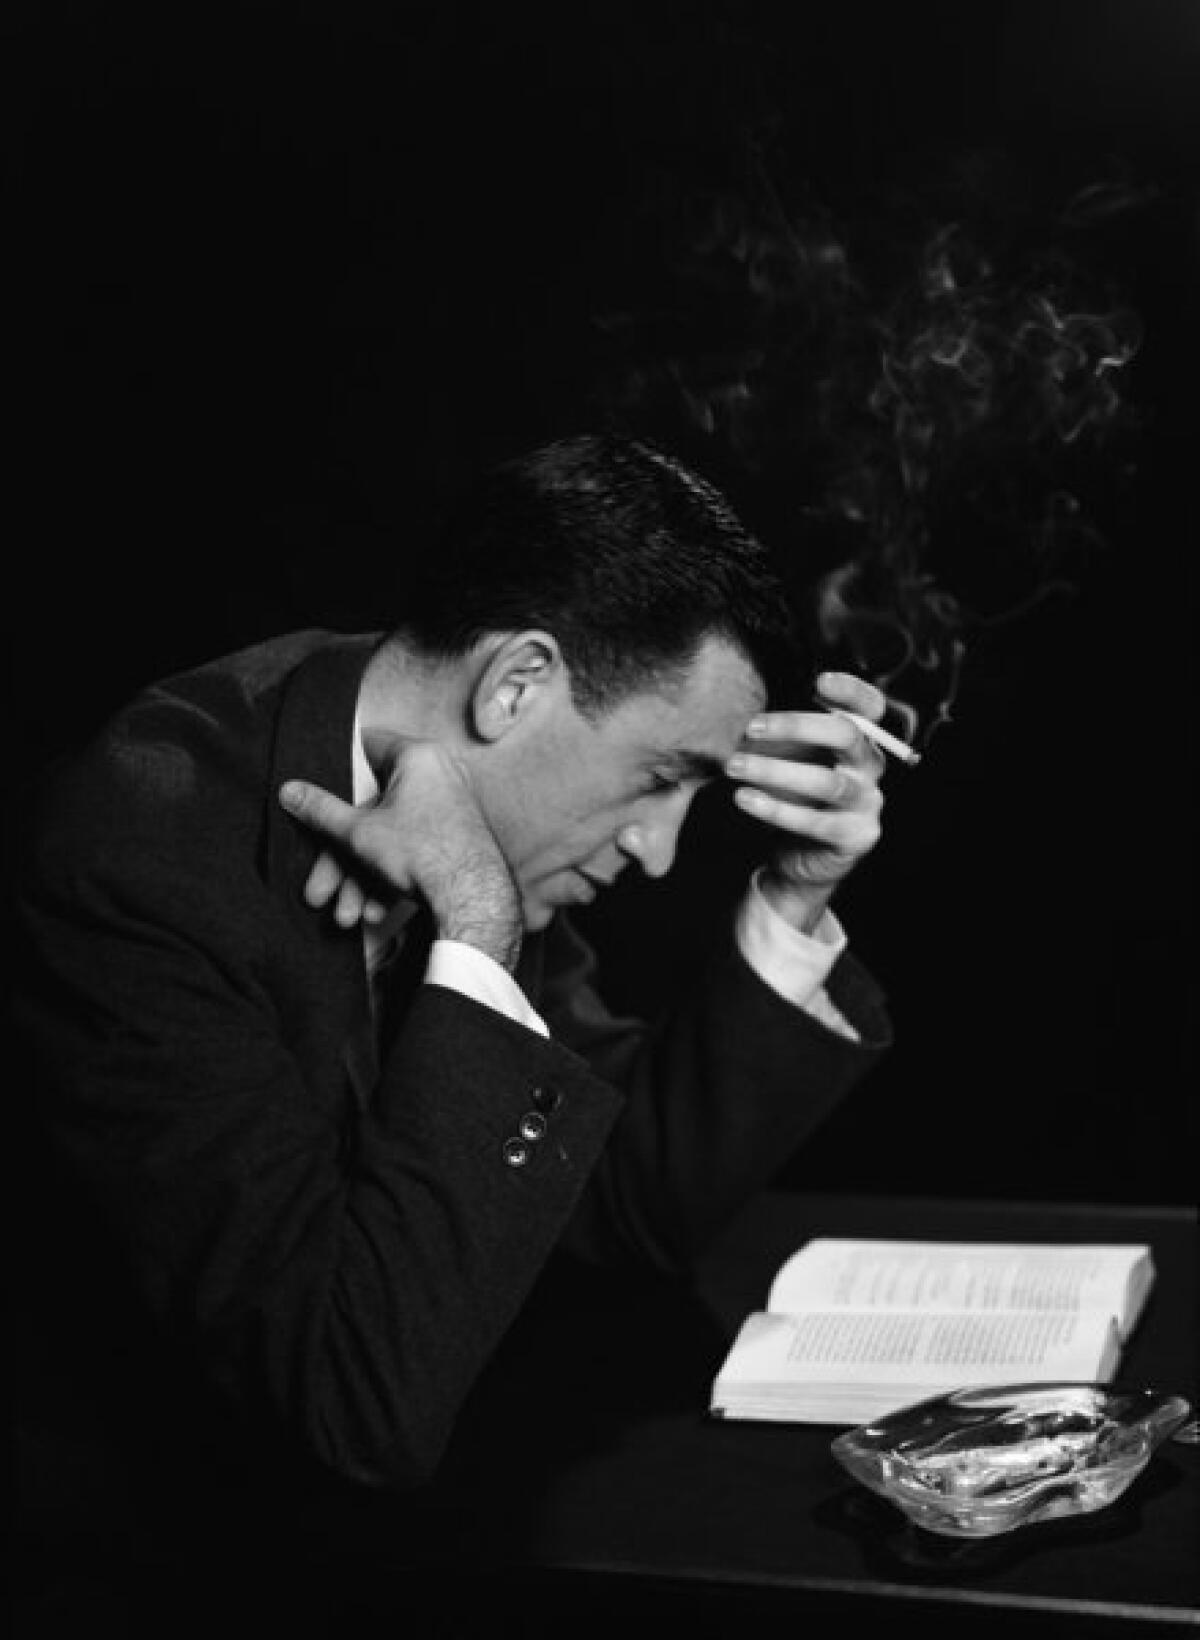 J.D. Salinger reads from his novel "The Catcher in the Rye" in 1952.